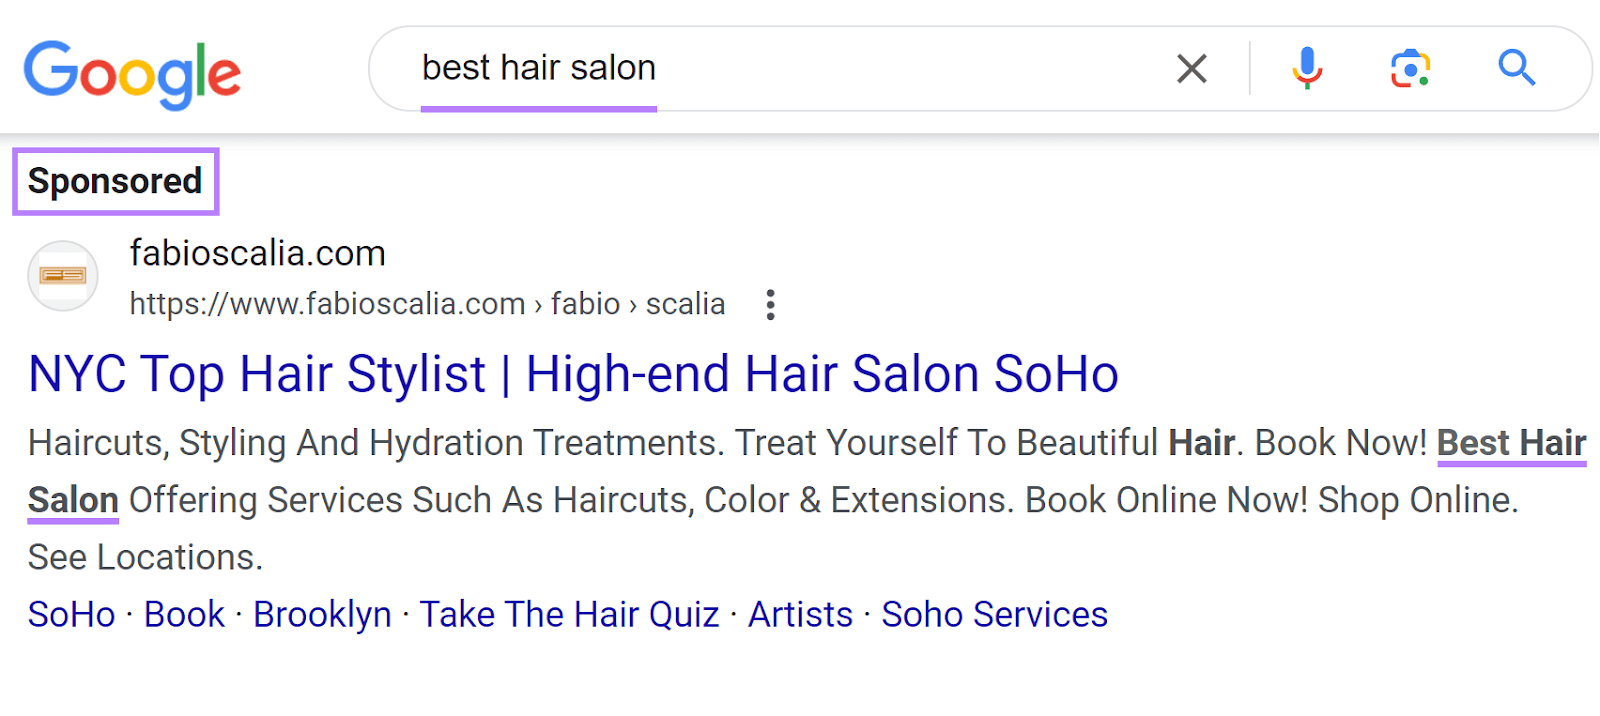 "Sponsored" results on Google SERP for a best hair salon